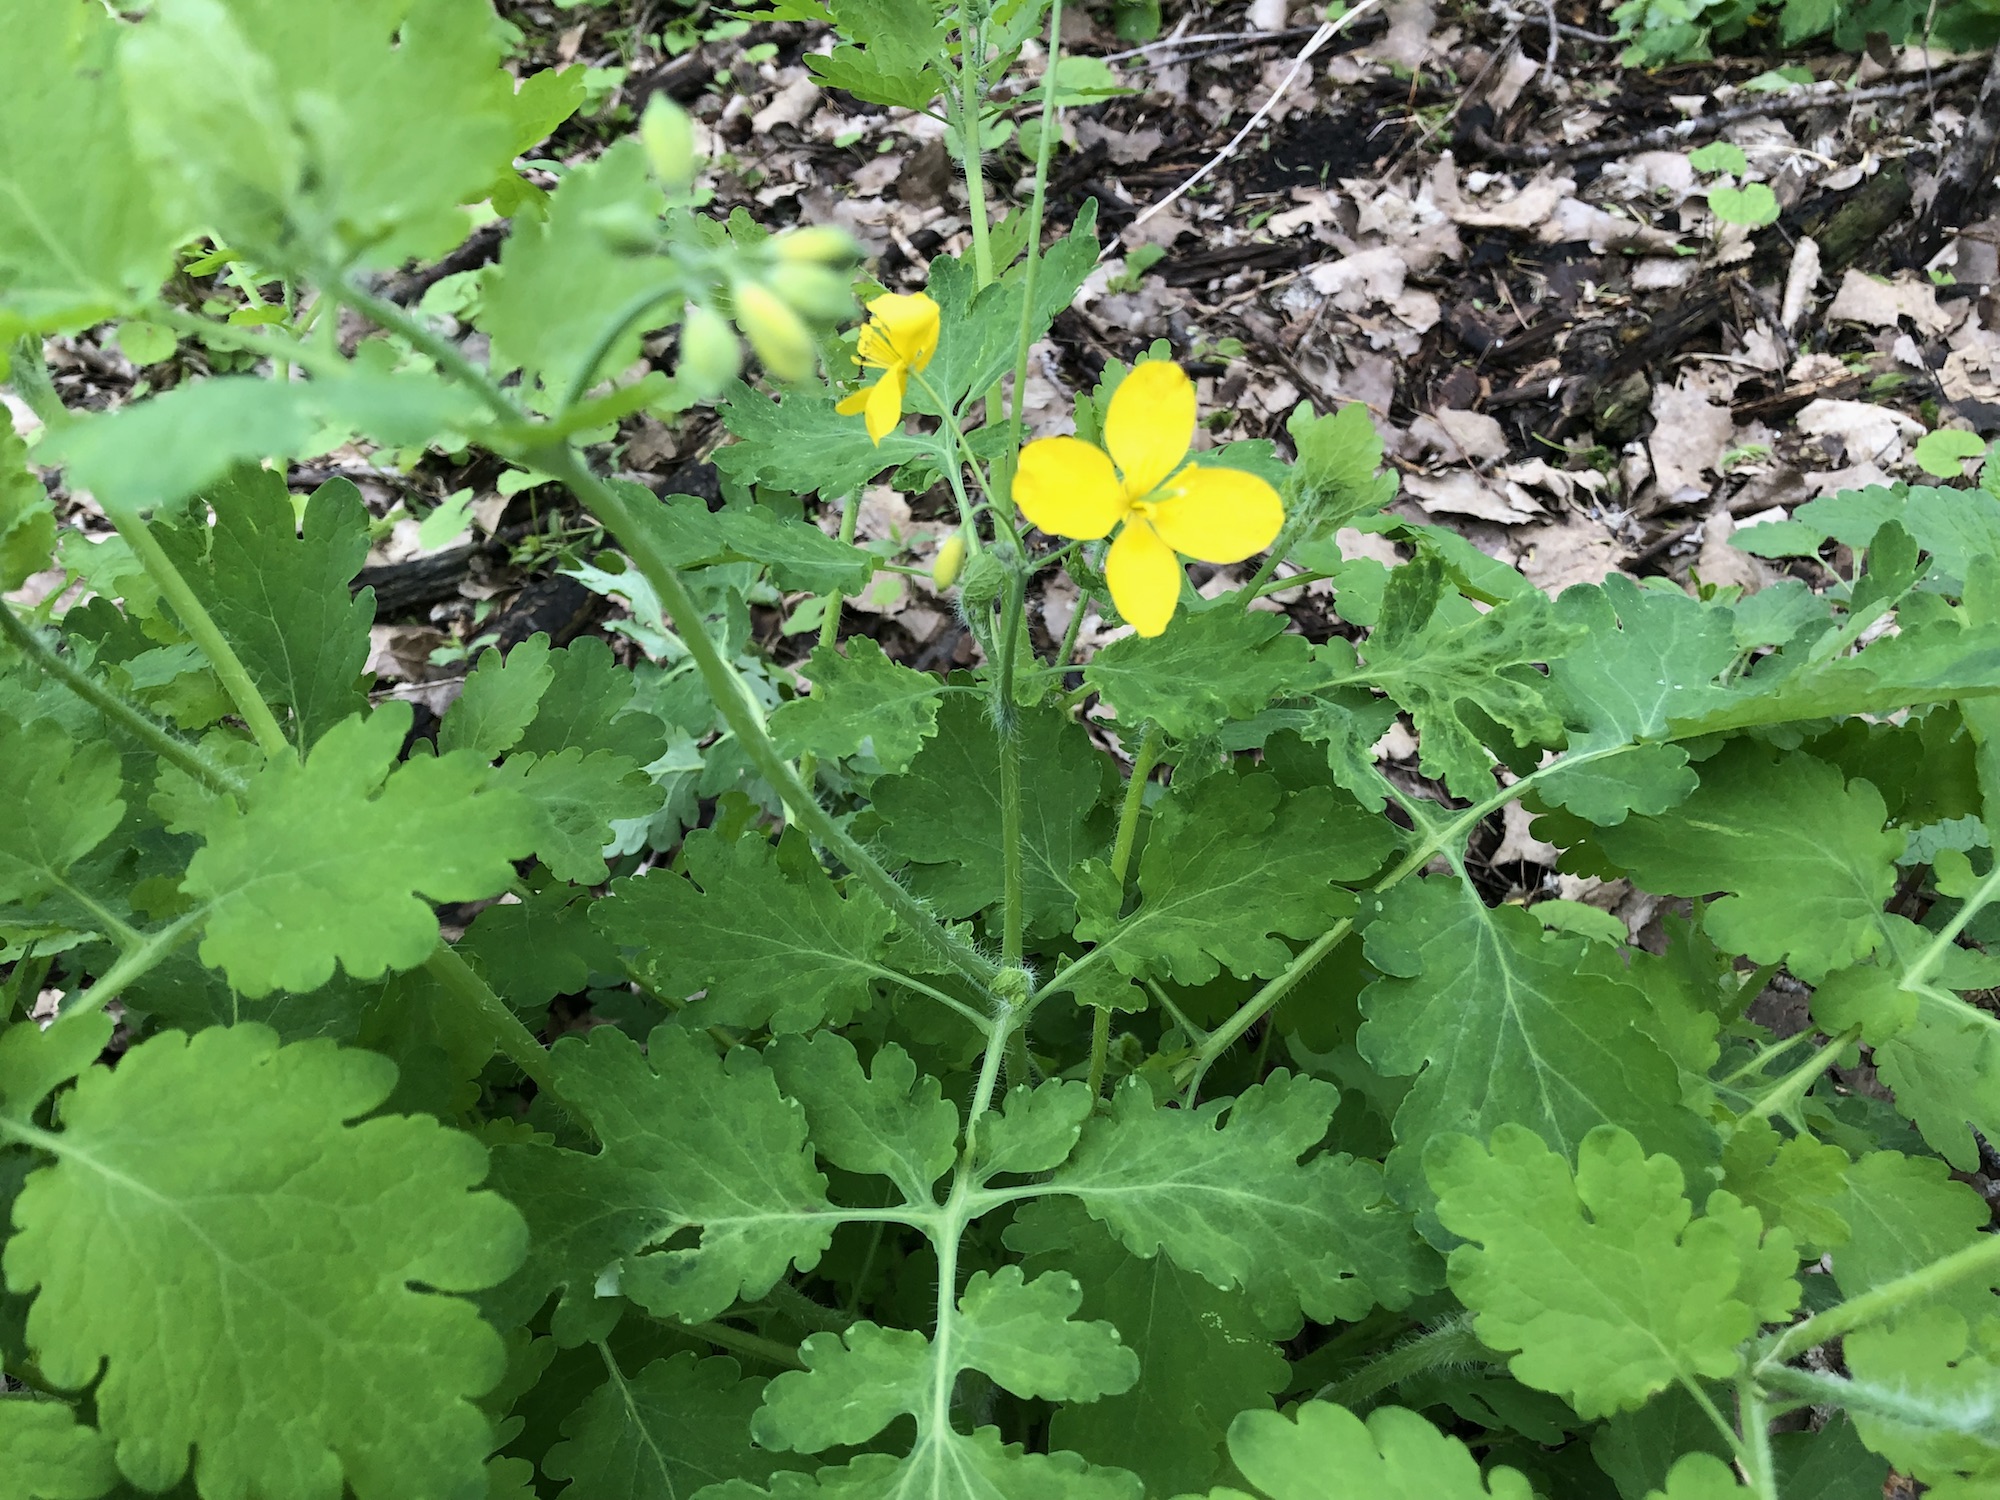 Greater Celandine on May 20, 2019.